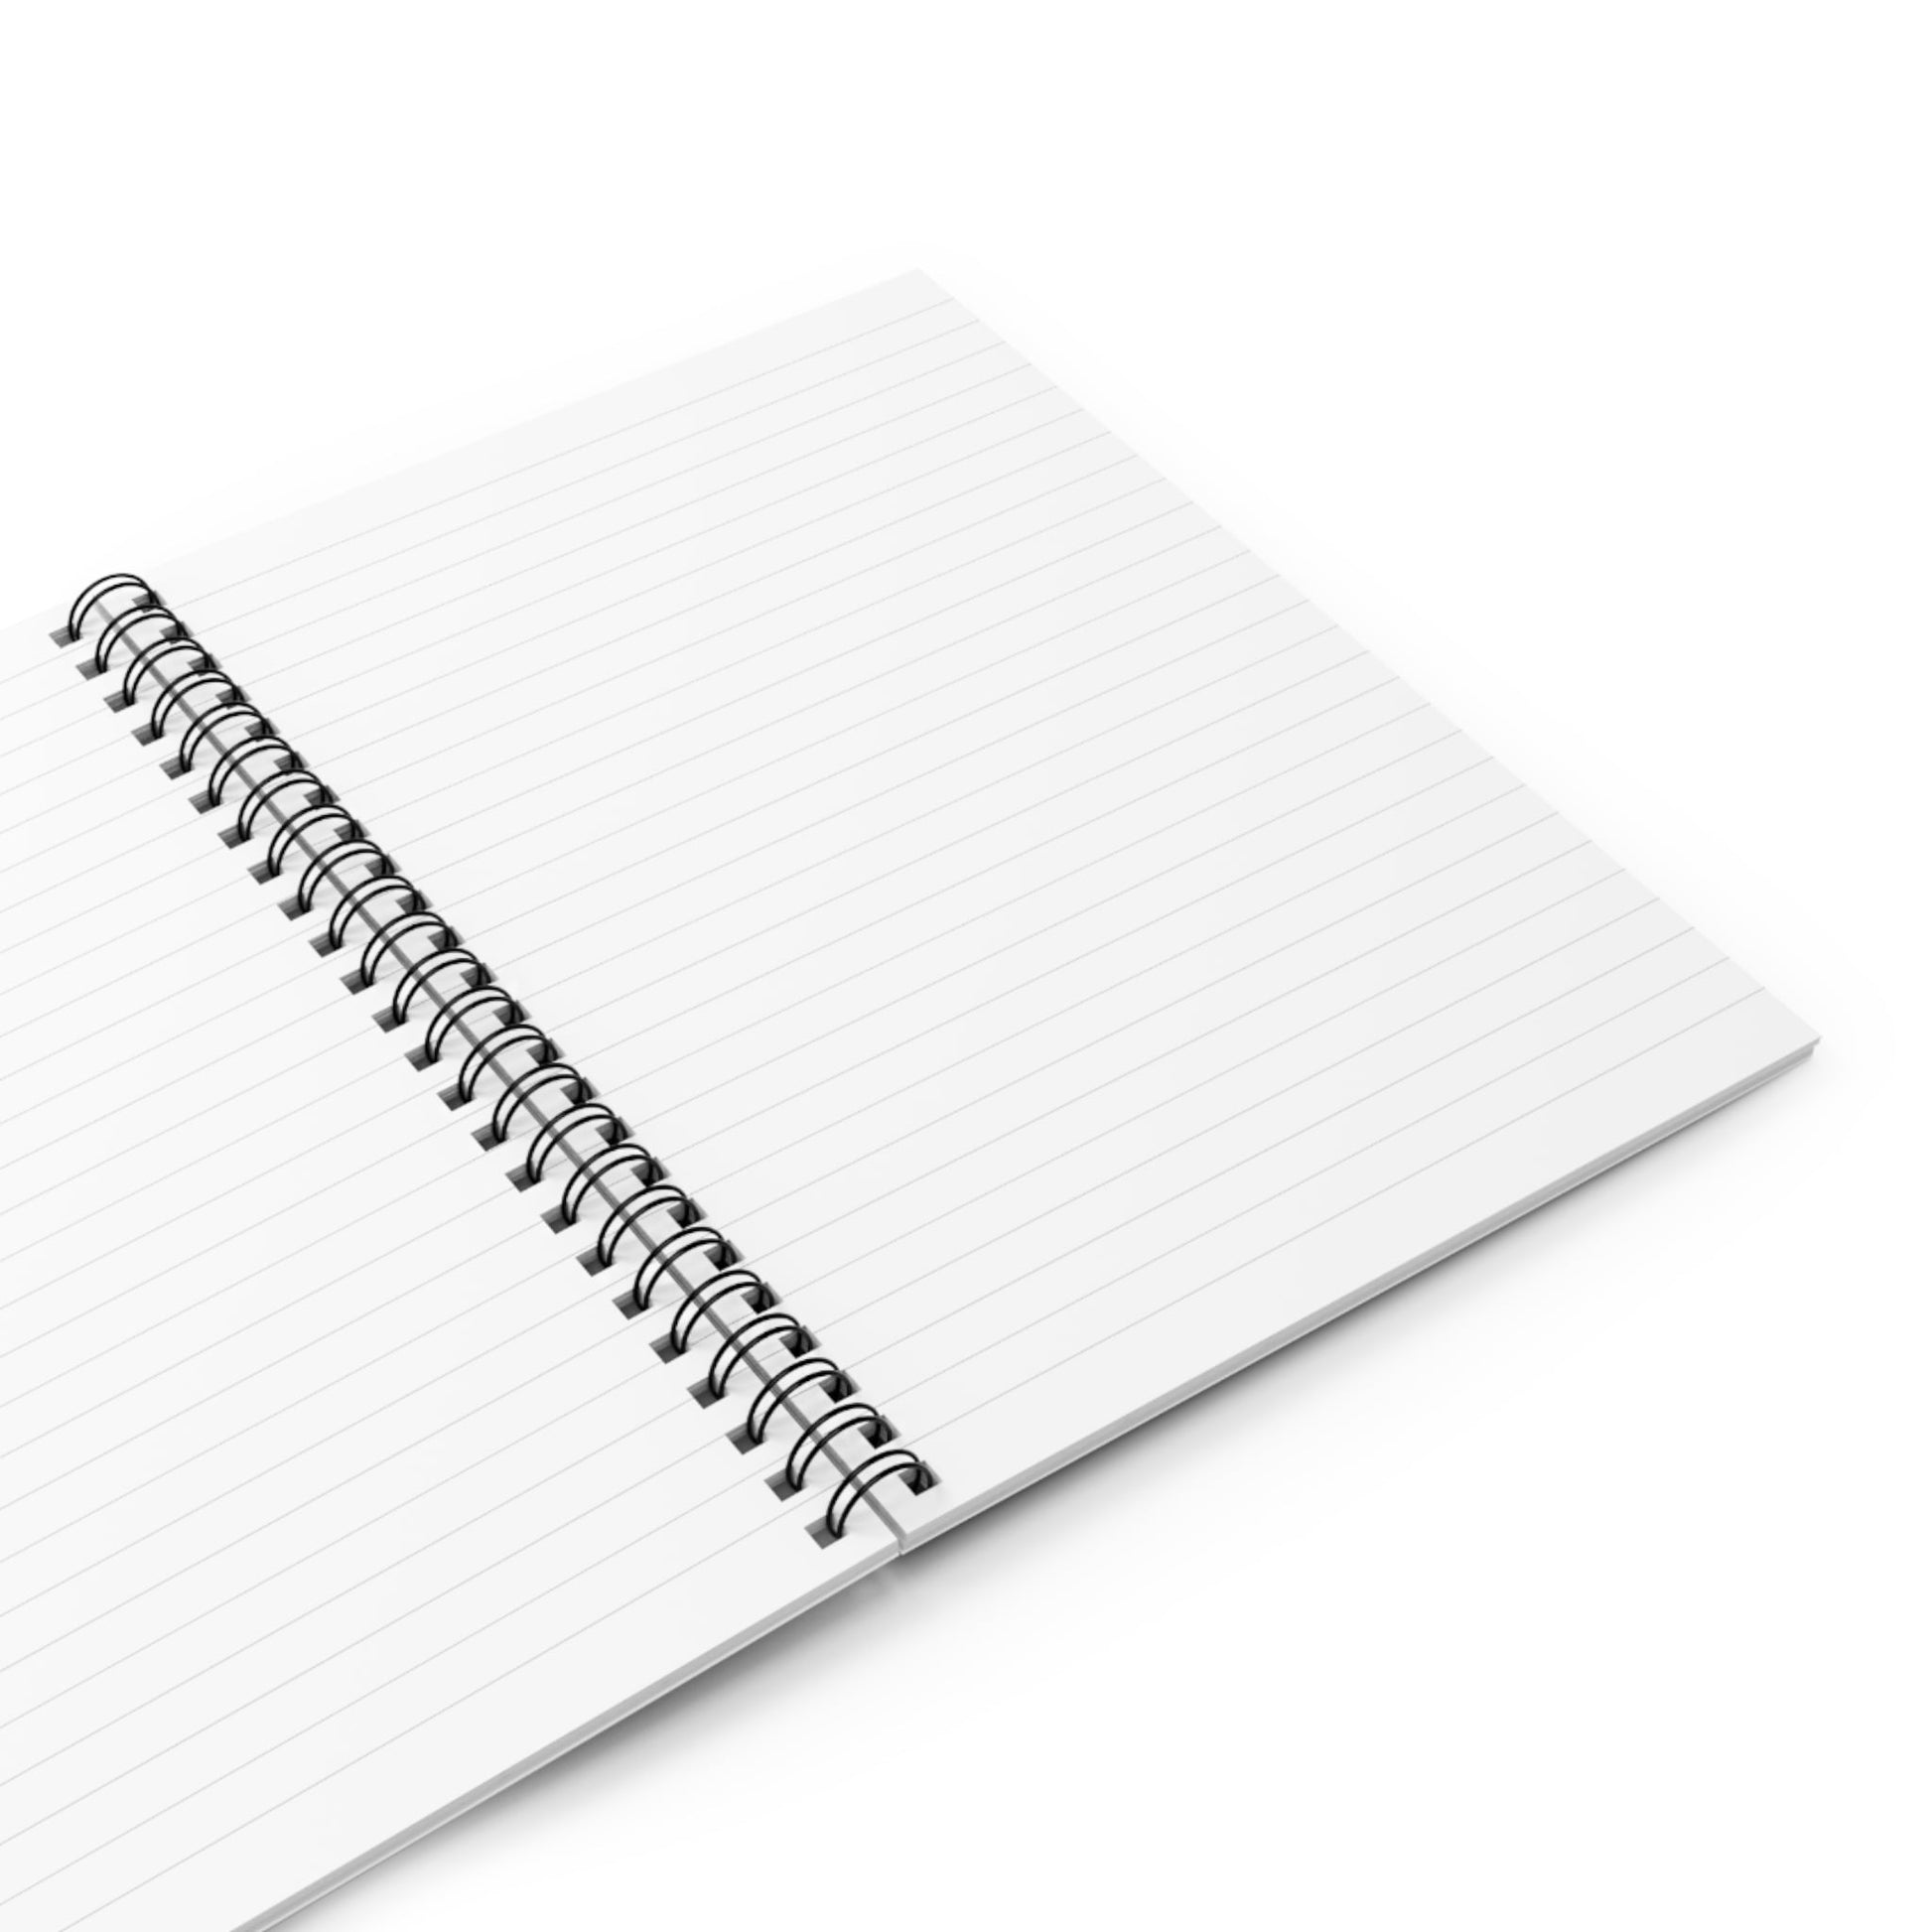 Spiral Notebook with Dusty Light Blue Cover Opened with Blank White College Ruled Pages